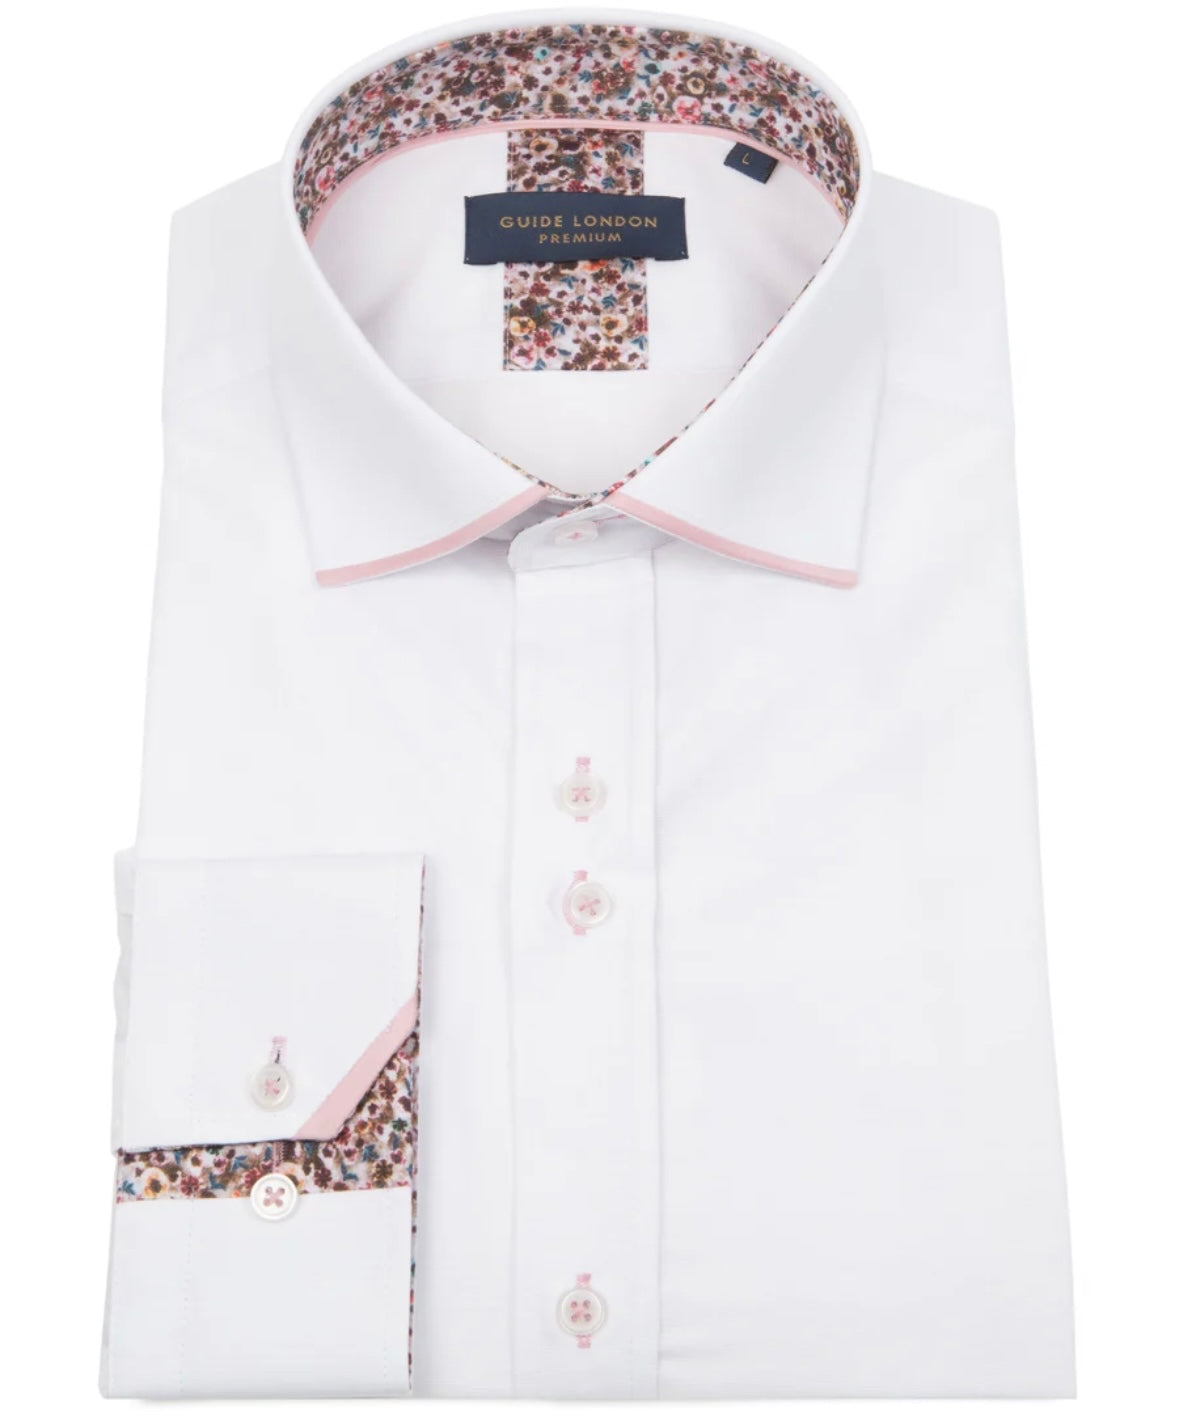 Guide London Shirt In White/Pink